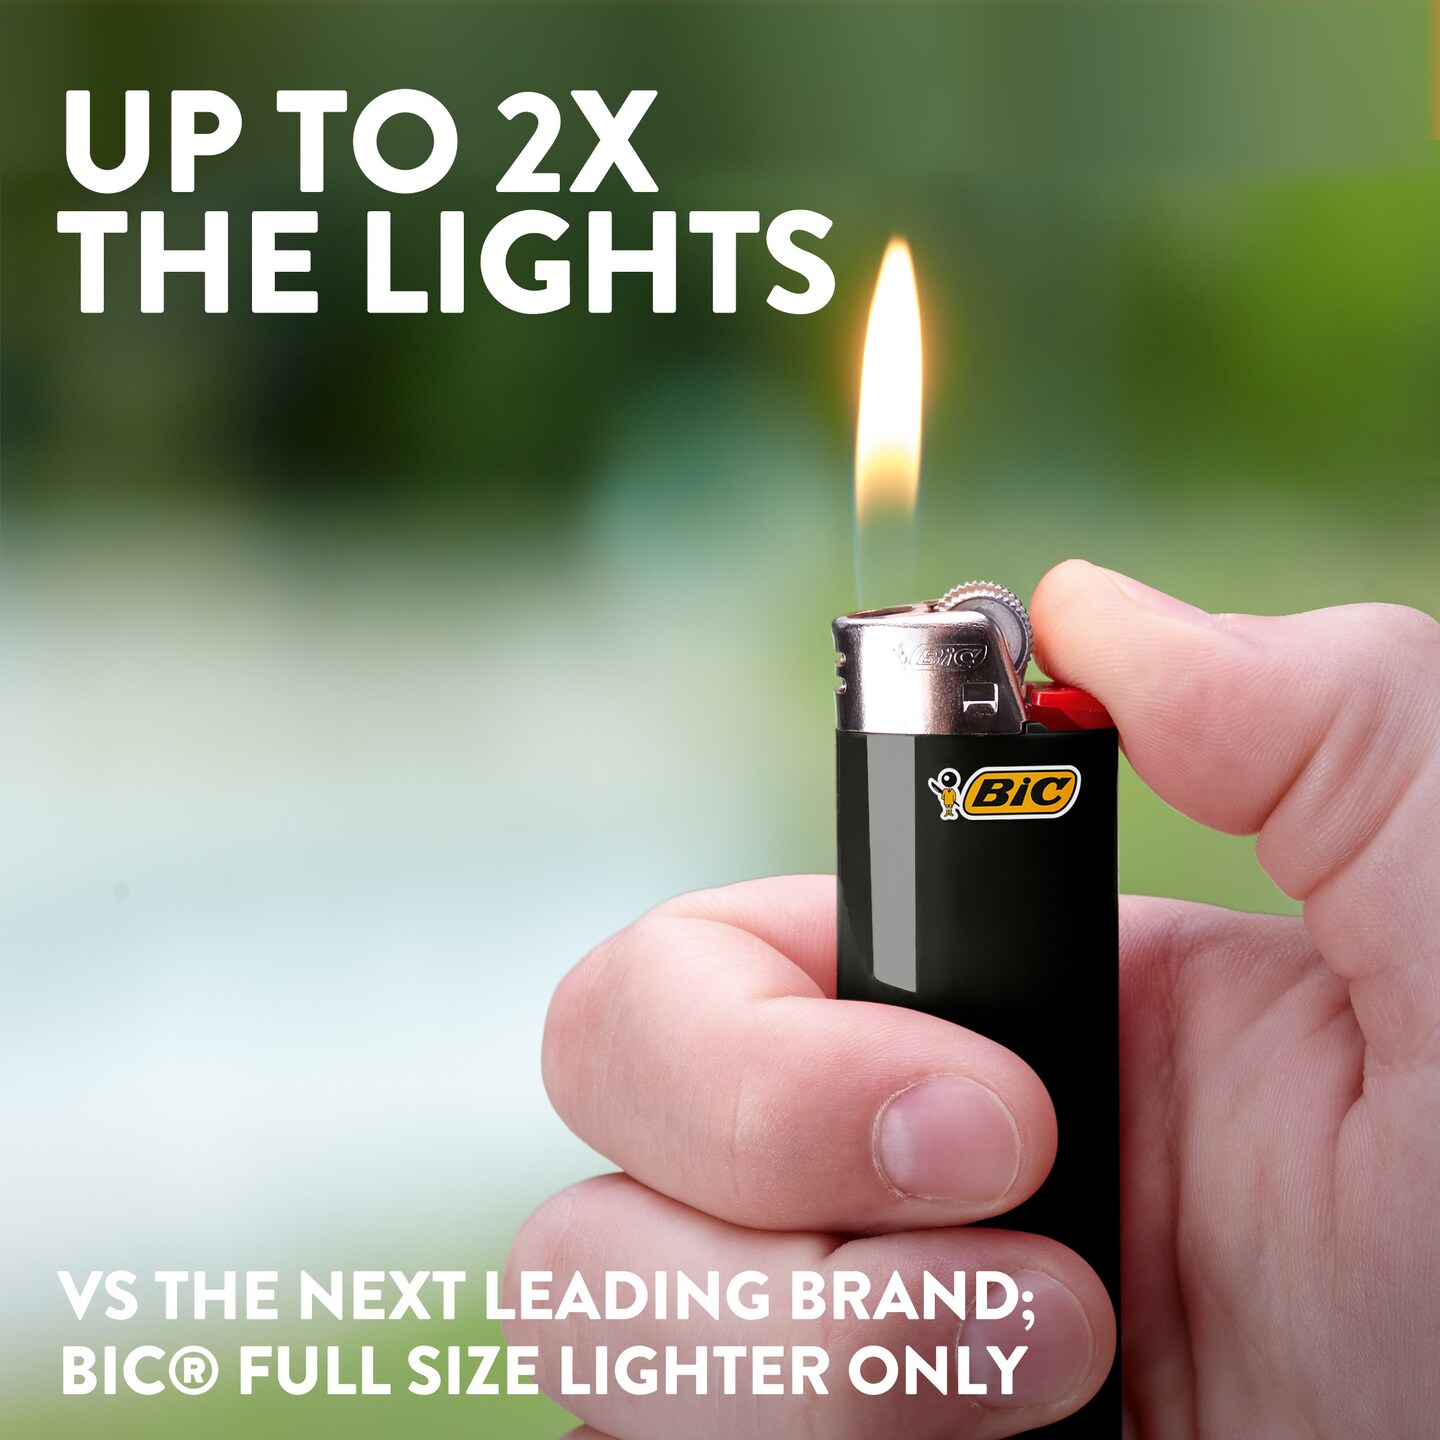 BIC Maxi Pocket Lighter, Special Edition Pickle Collection, Assorted Unique Lighter Designs, 6 Count Pack of Lighters